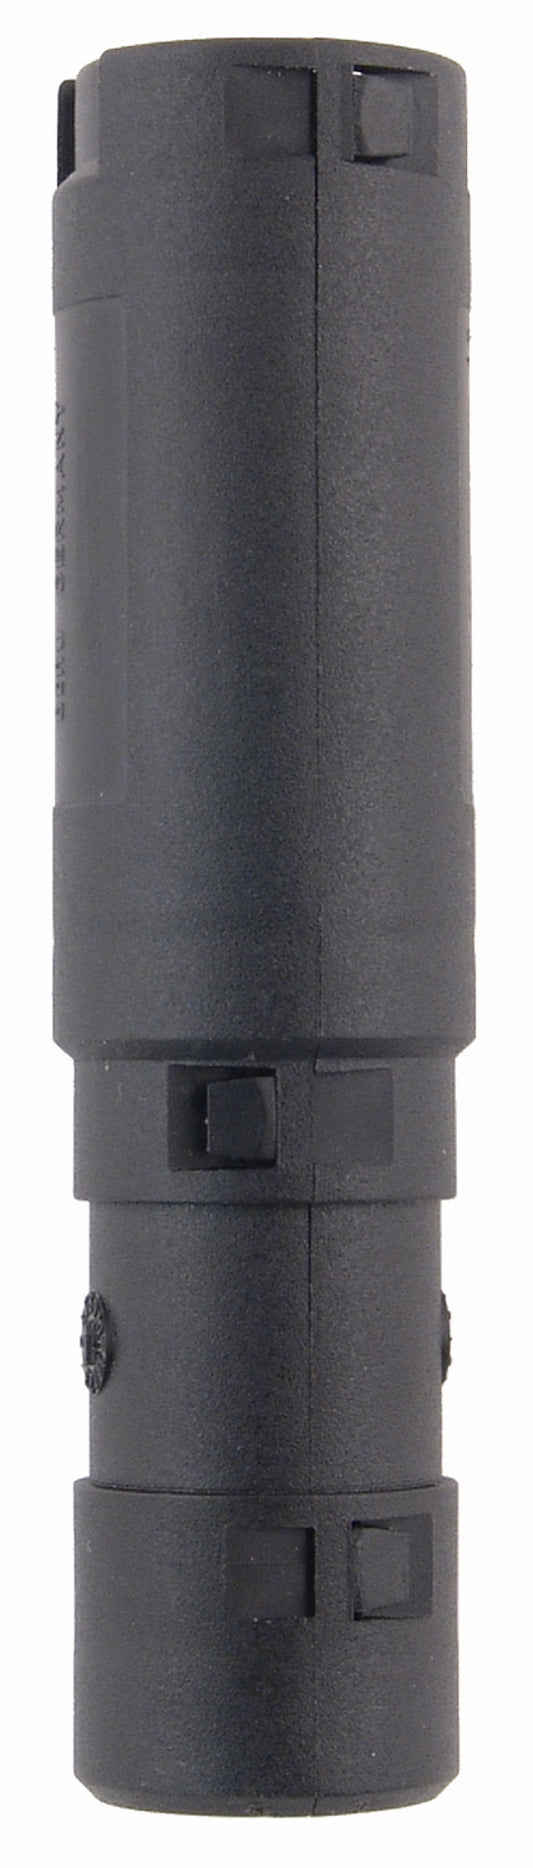 NGK Mercedes-Benz C230 2005-2003 Direct Ignition Coil Boot